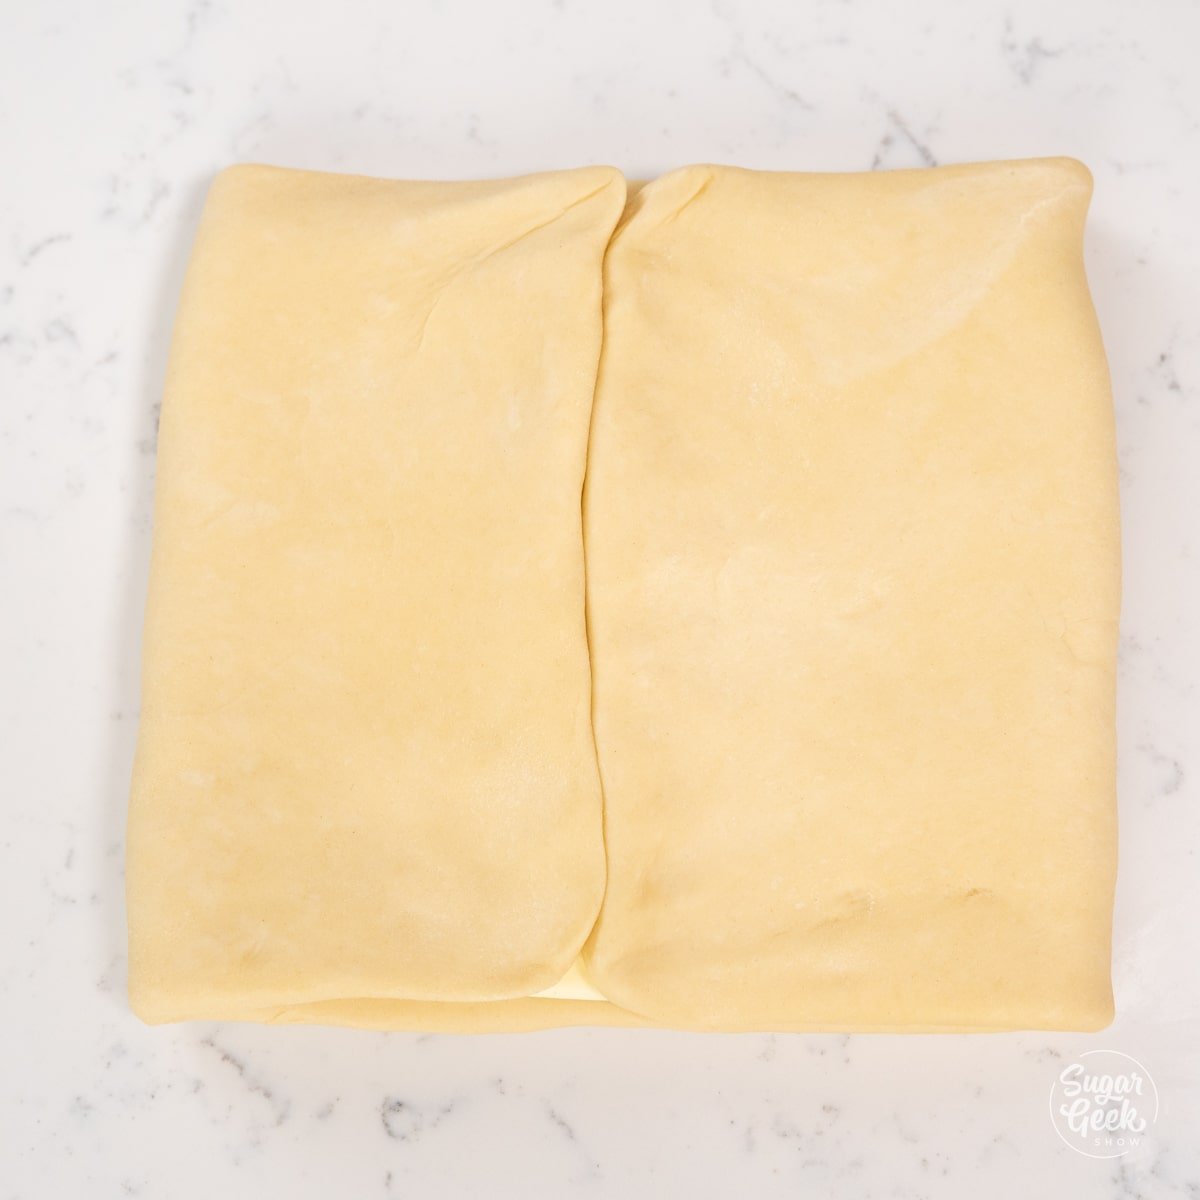 croissant dough folded with a seam down the center